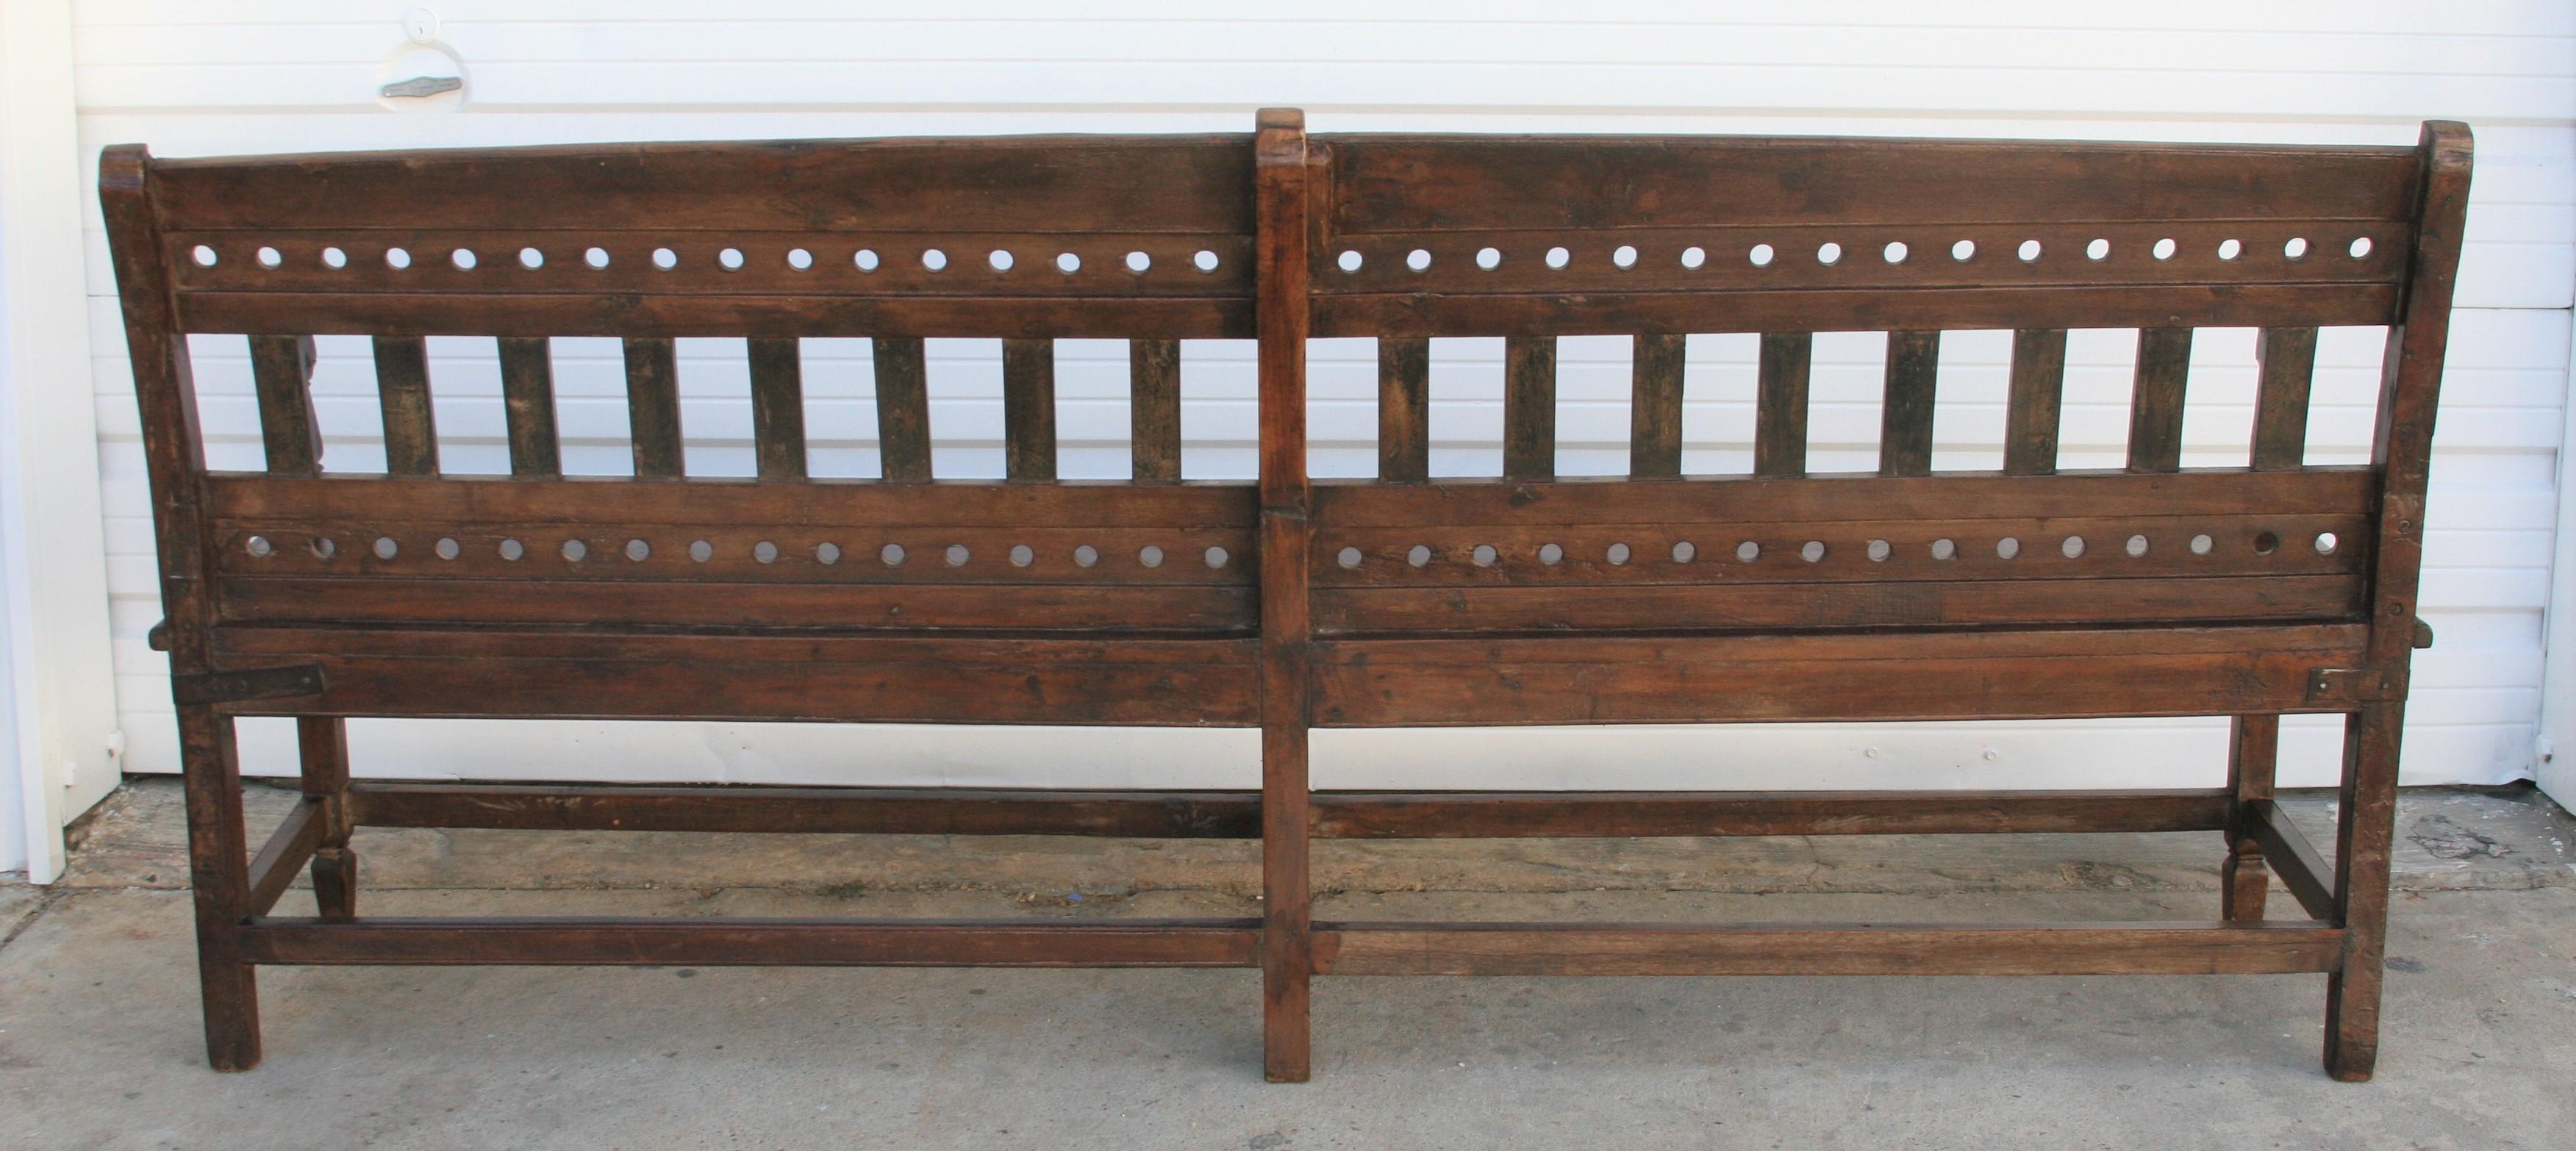 Classic Example of a Colonial Era Bench from the British Empire For Sale 1